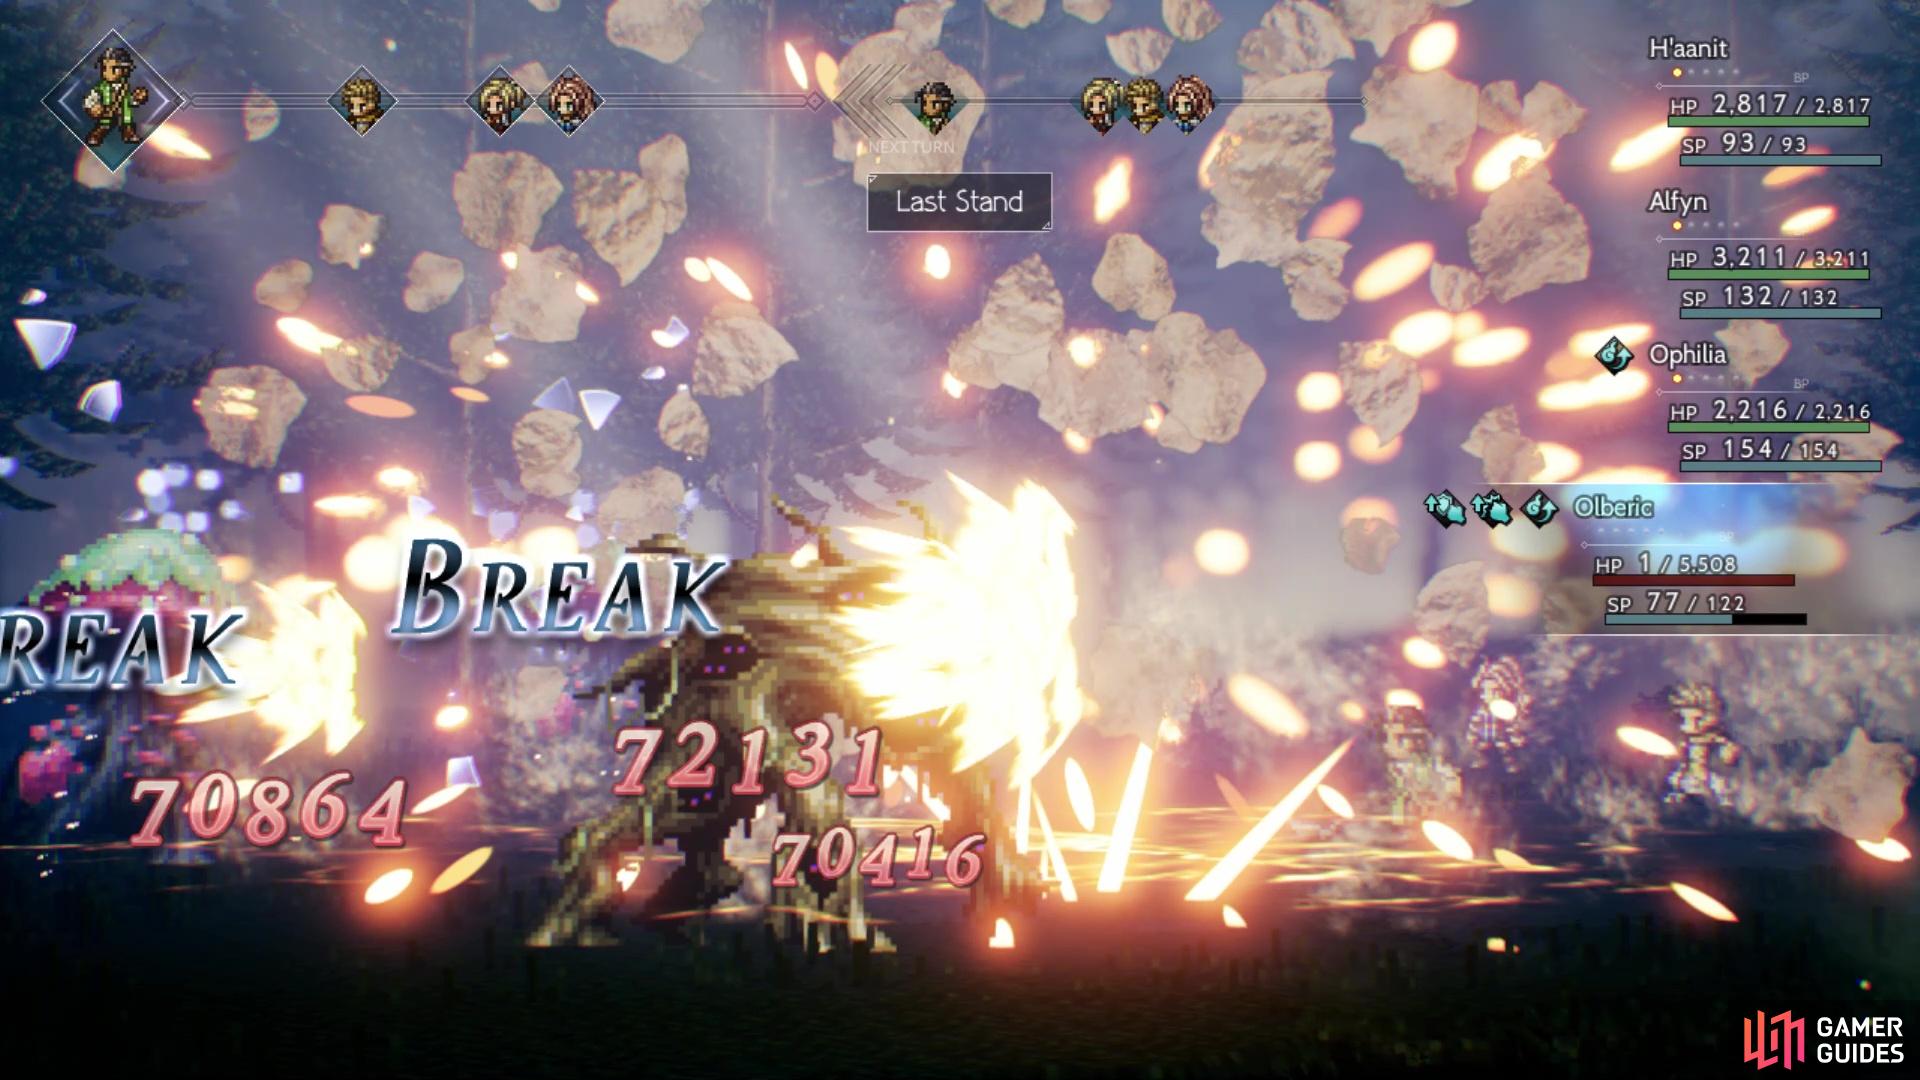 Olberic can make grinding easy with the low HP Last Stand build